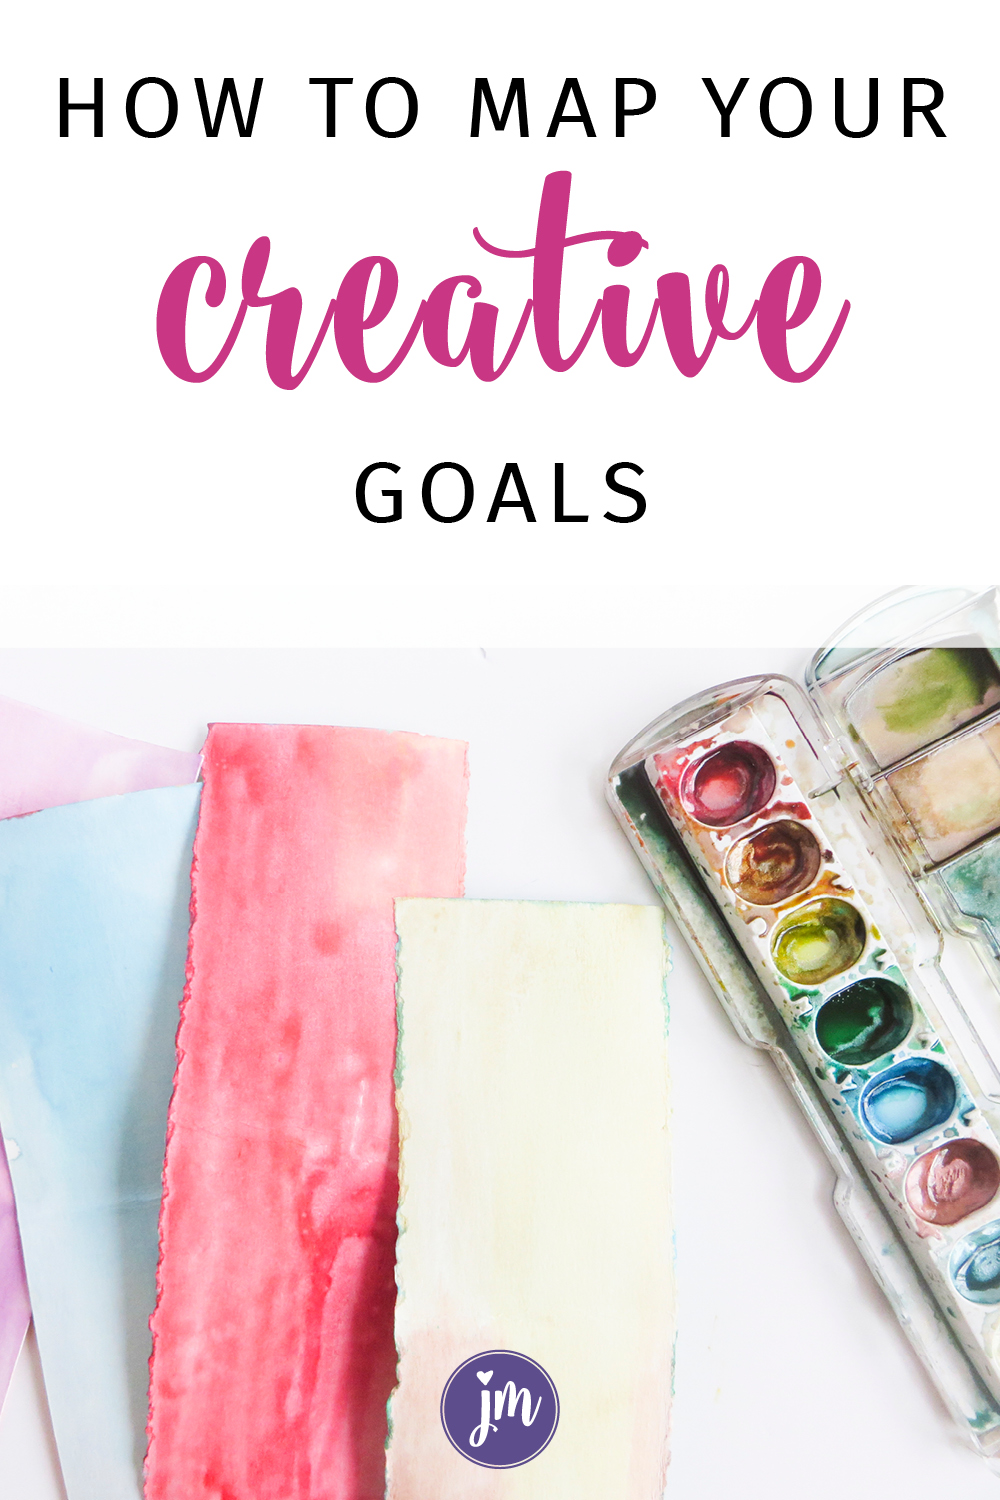 Learn how to create a goal map for your creative projects! This is such a great way to keep track of where you are and what you need to do PLUS you can make your goal map reflect your own unique personality. Love this idea!